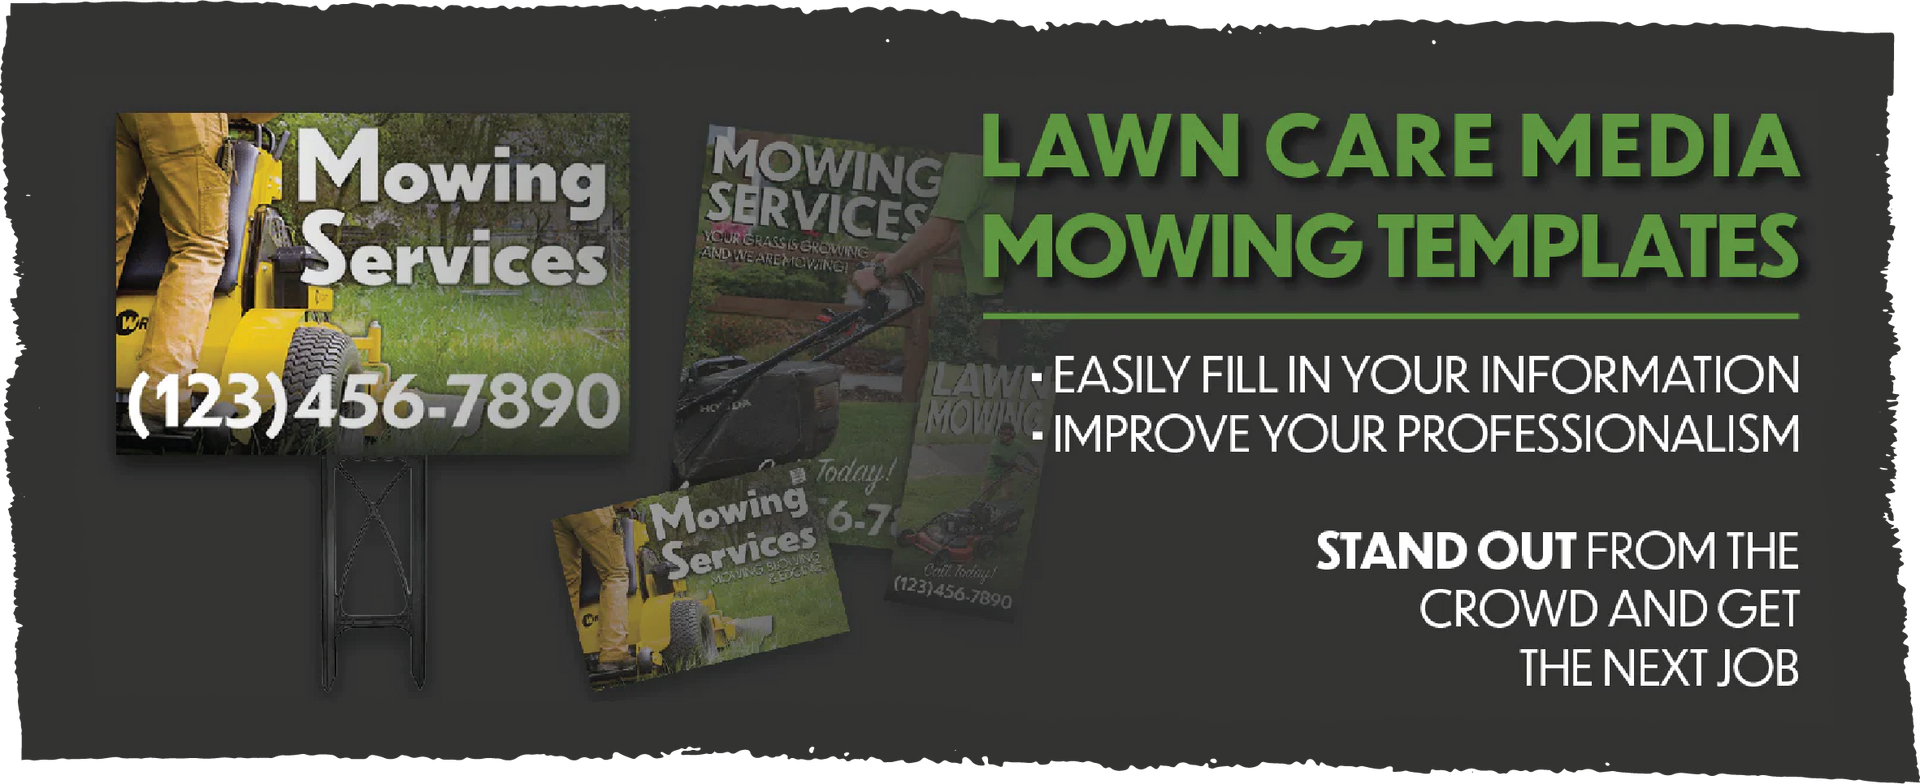 a lawn care media ad for mowing services